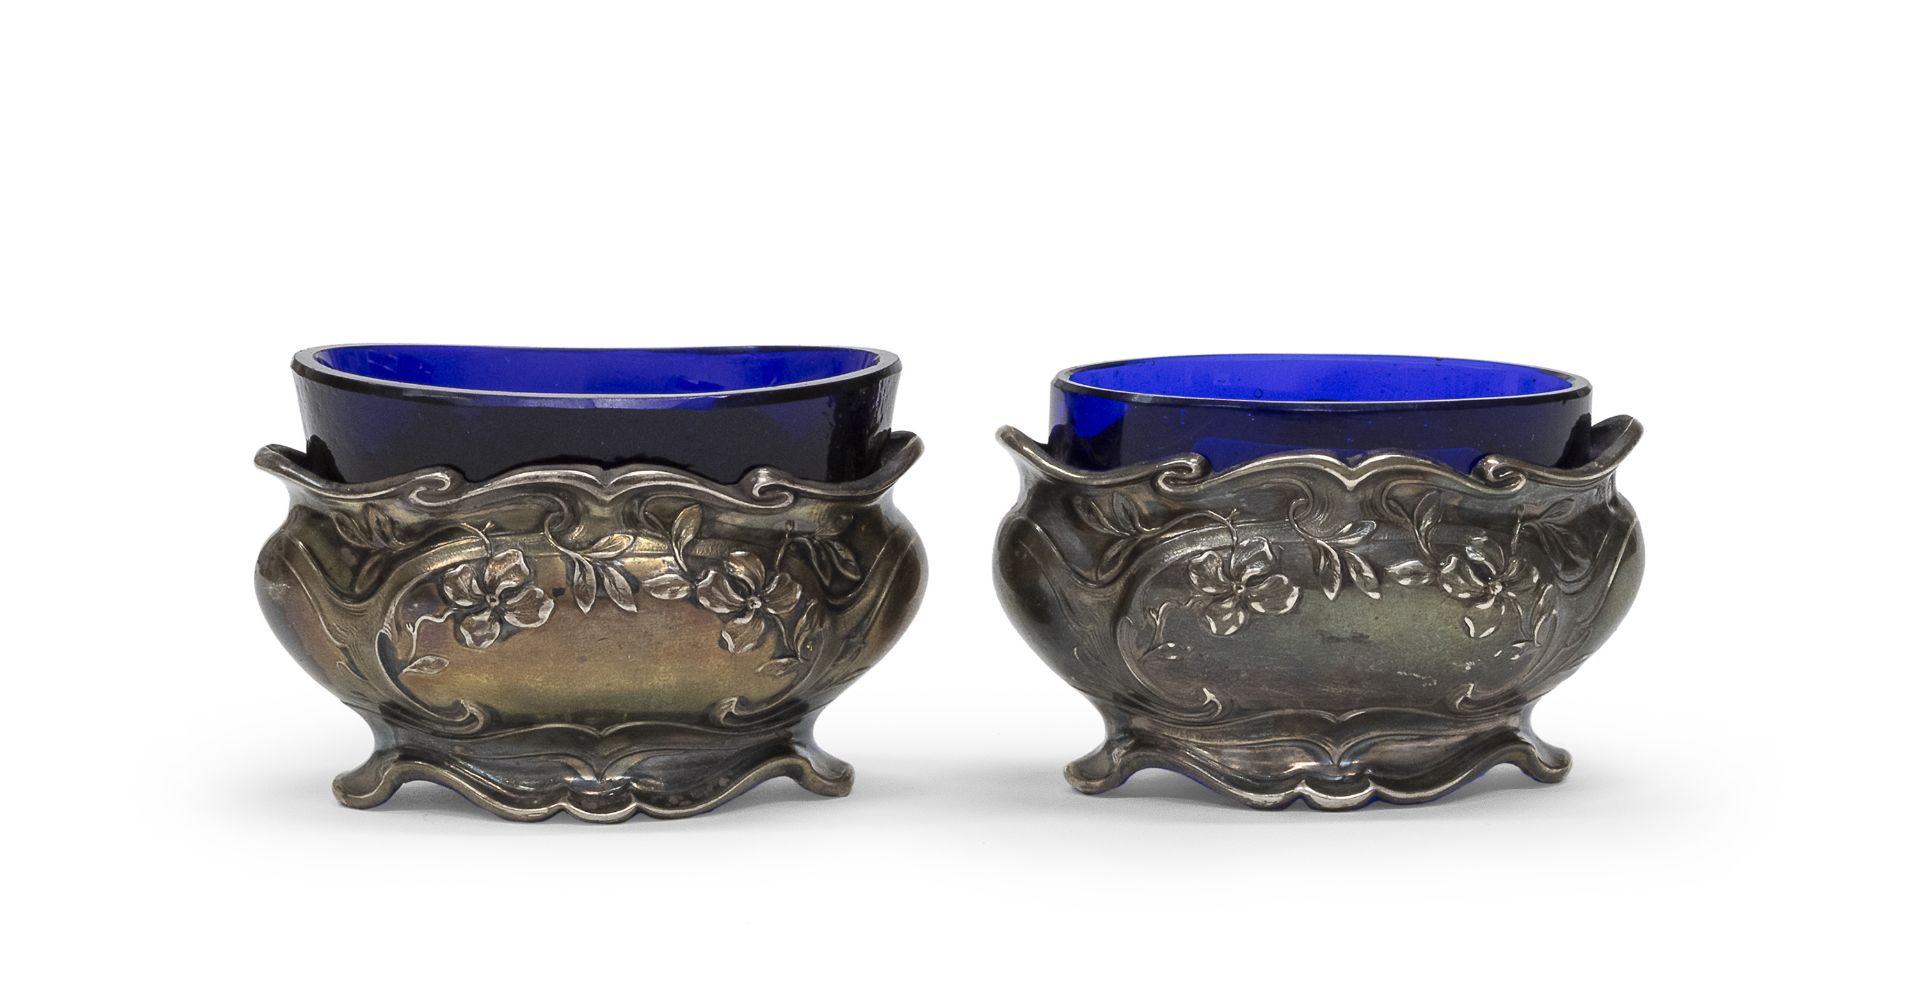 PAIR OF SILVER SALT CELLARS FRANCE SECOND HALF OF THE 19TH CENTURY